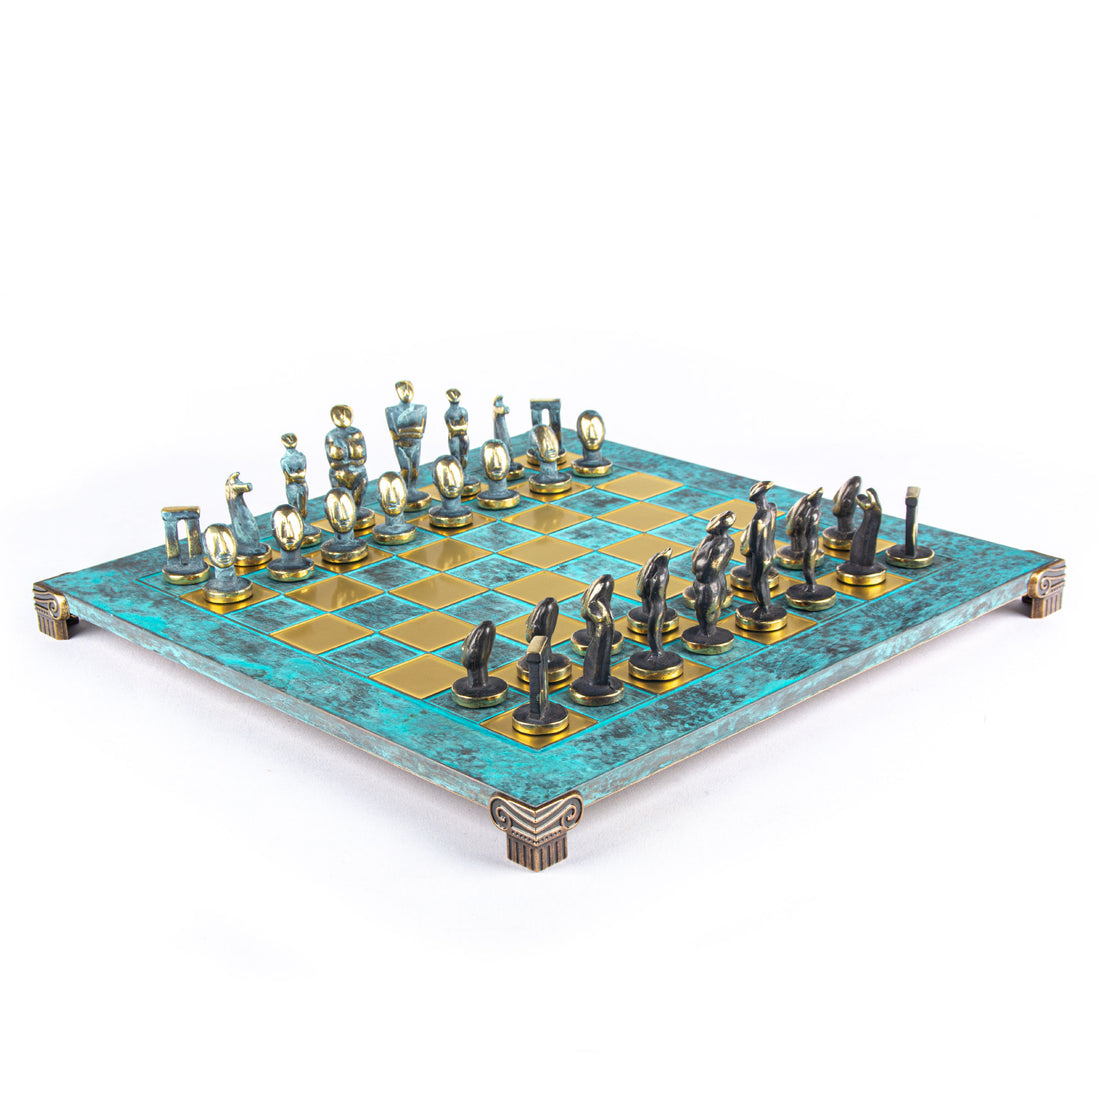 CYCLADIC ART SOLID BRASS CHESS SET with blue/brown chessmen and bronze chessboard 44 x 44cm (Large) - Premium Chess from MANOPOULOS Chess & Backgammon - Just €320! Shop now at MANOPOULOS Chess & Backgammon